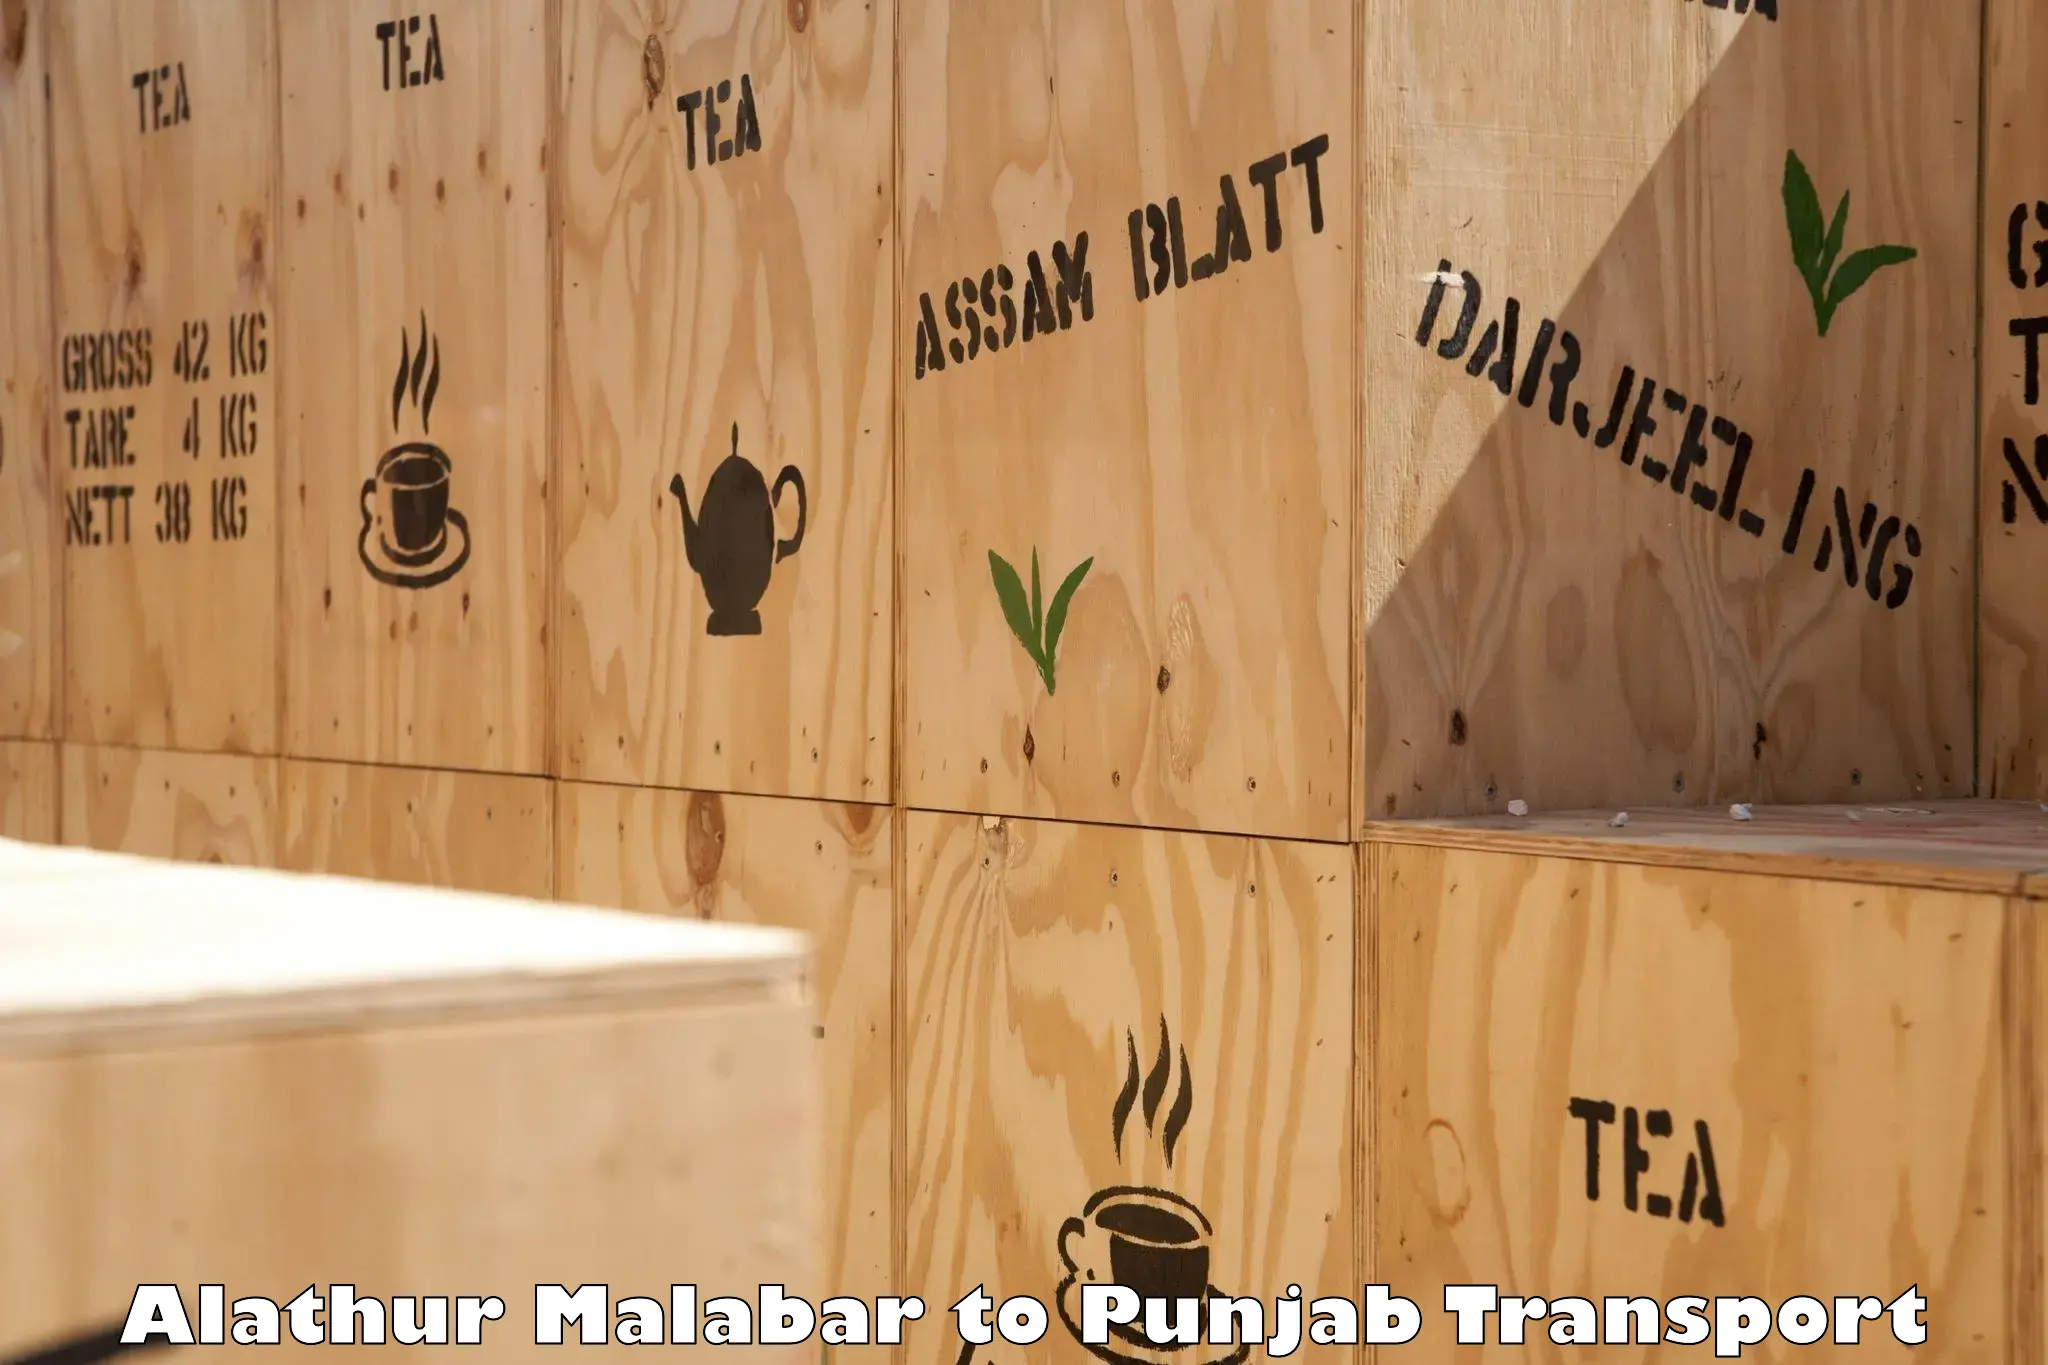 Container transport service Alathur Malabar to Ludhiana